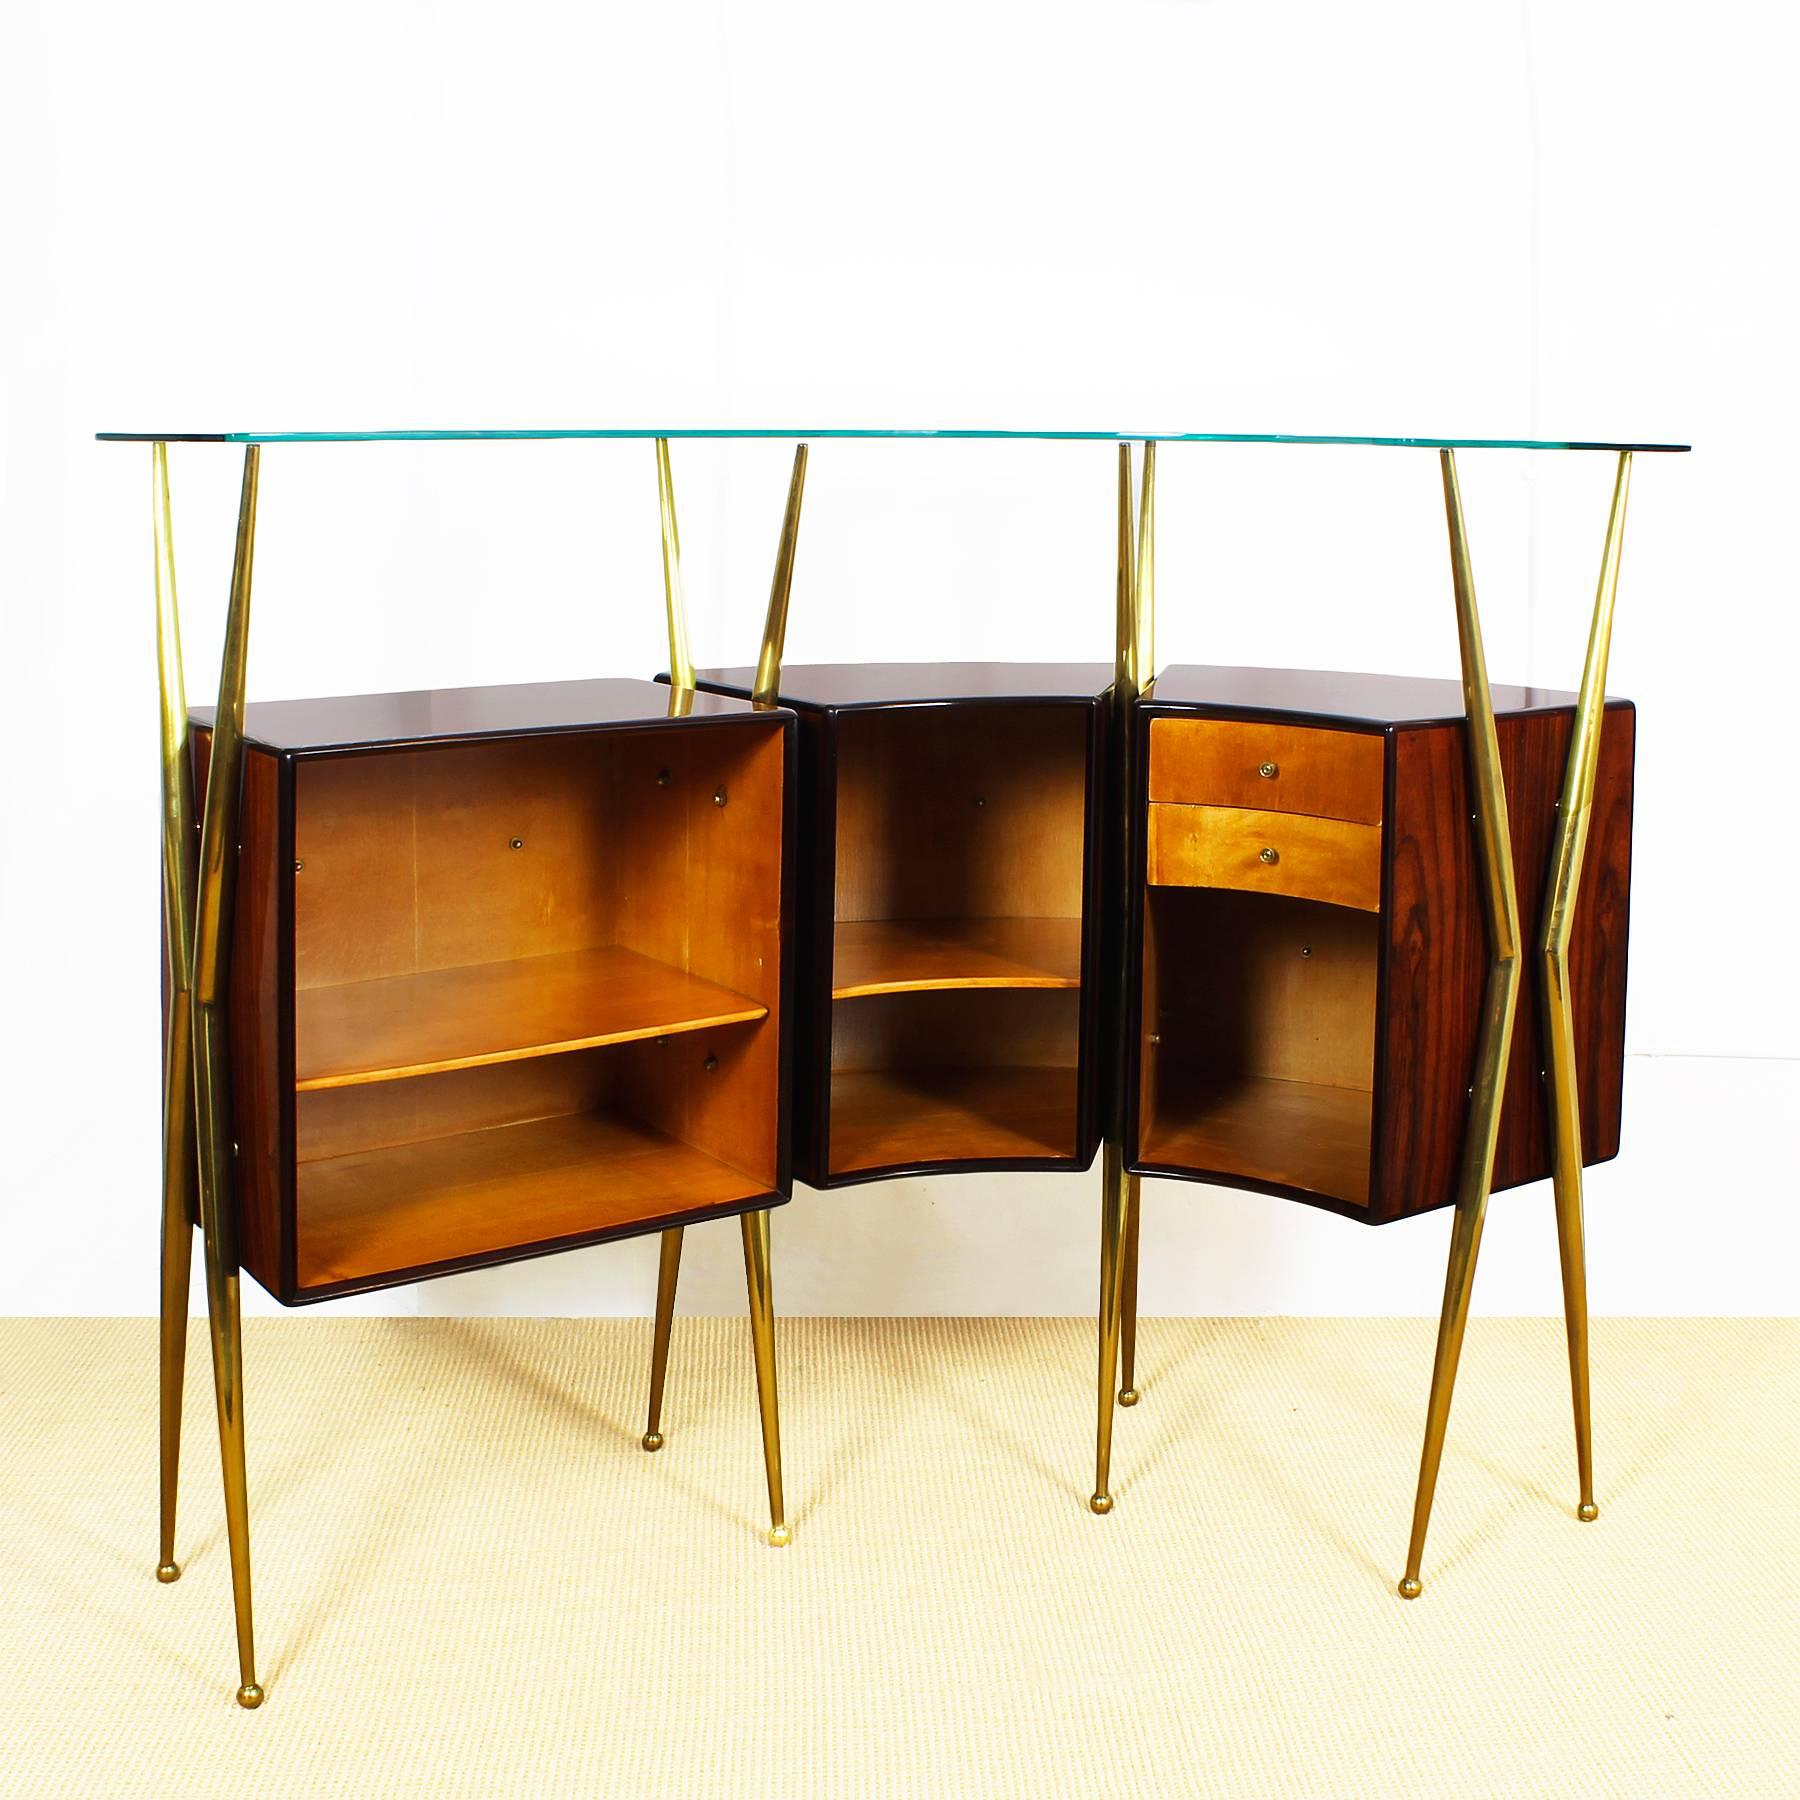 Polished 1950s Dry Bar Cabinet, counter and benches set in the style of Gio Ponti. Italy